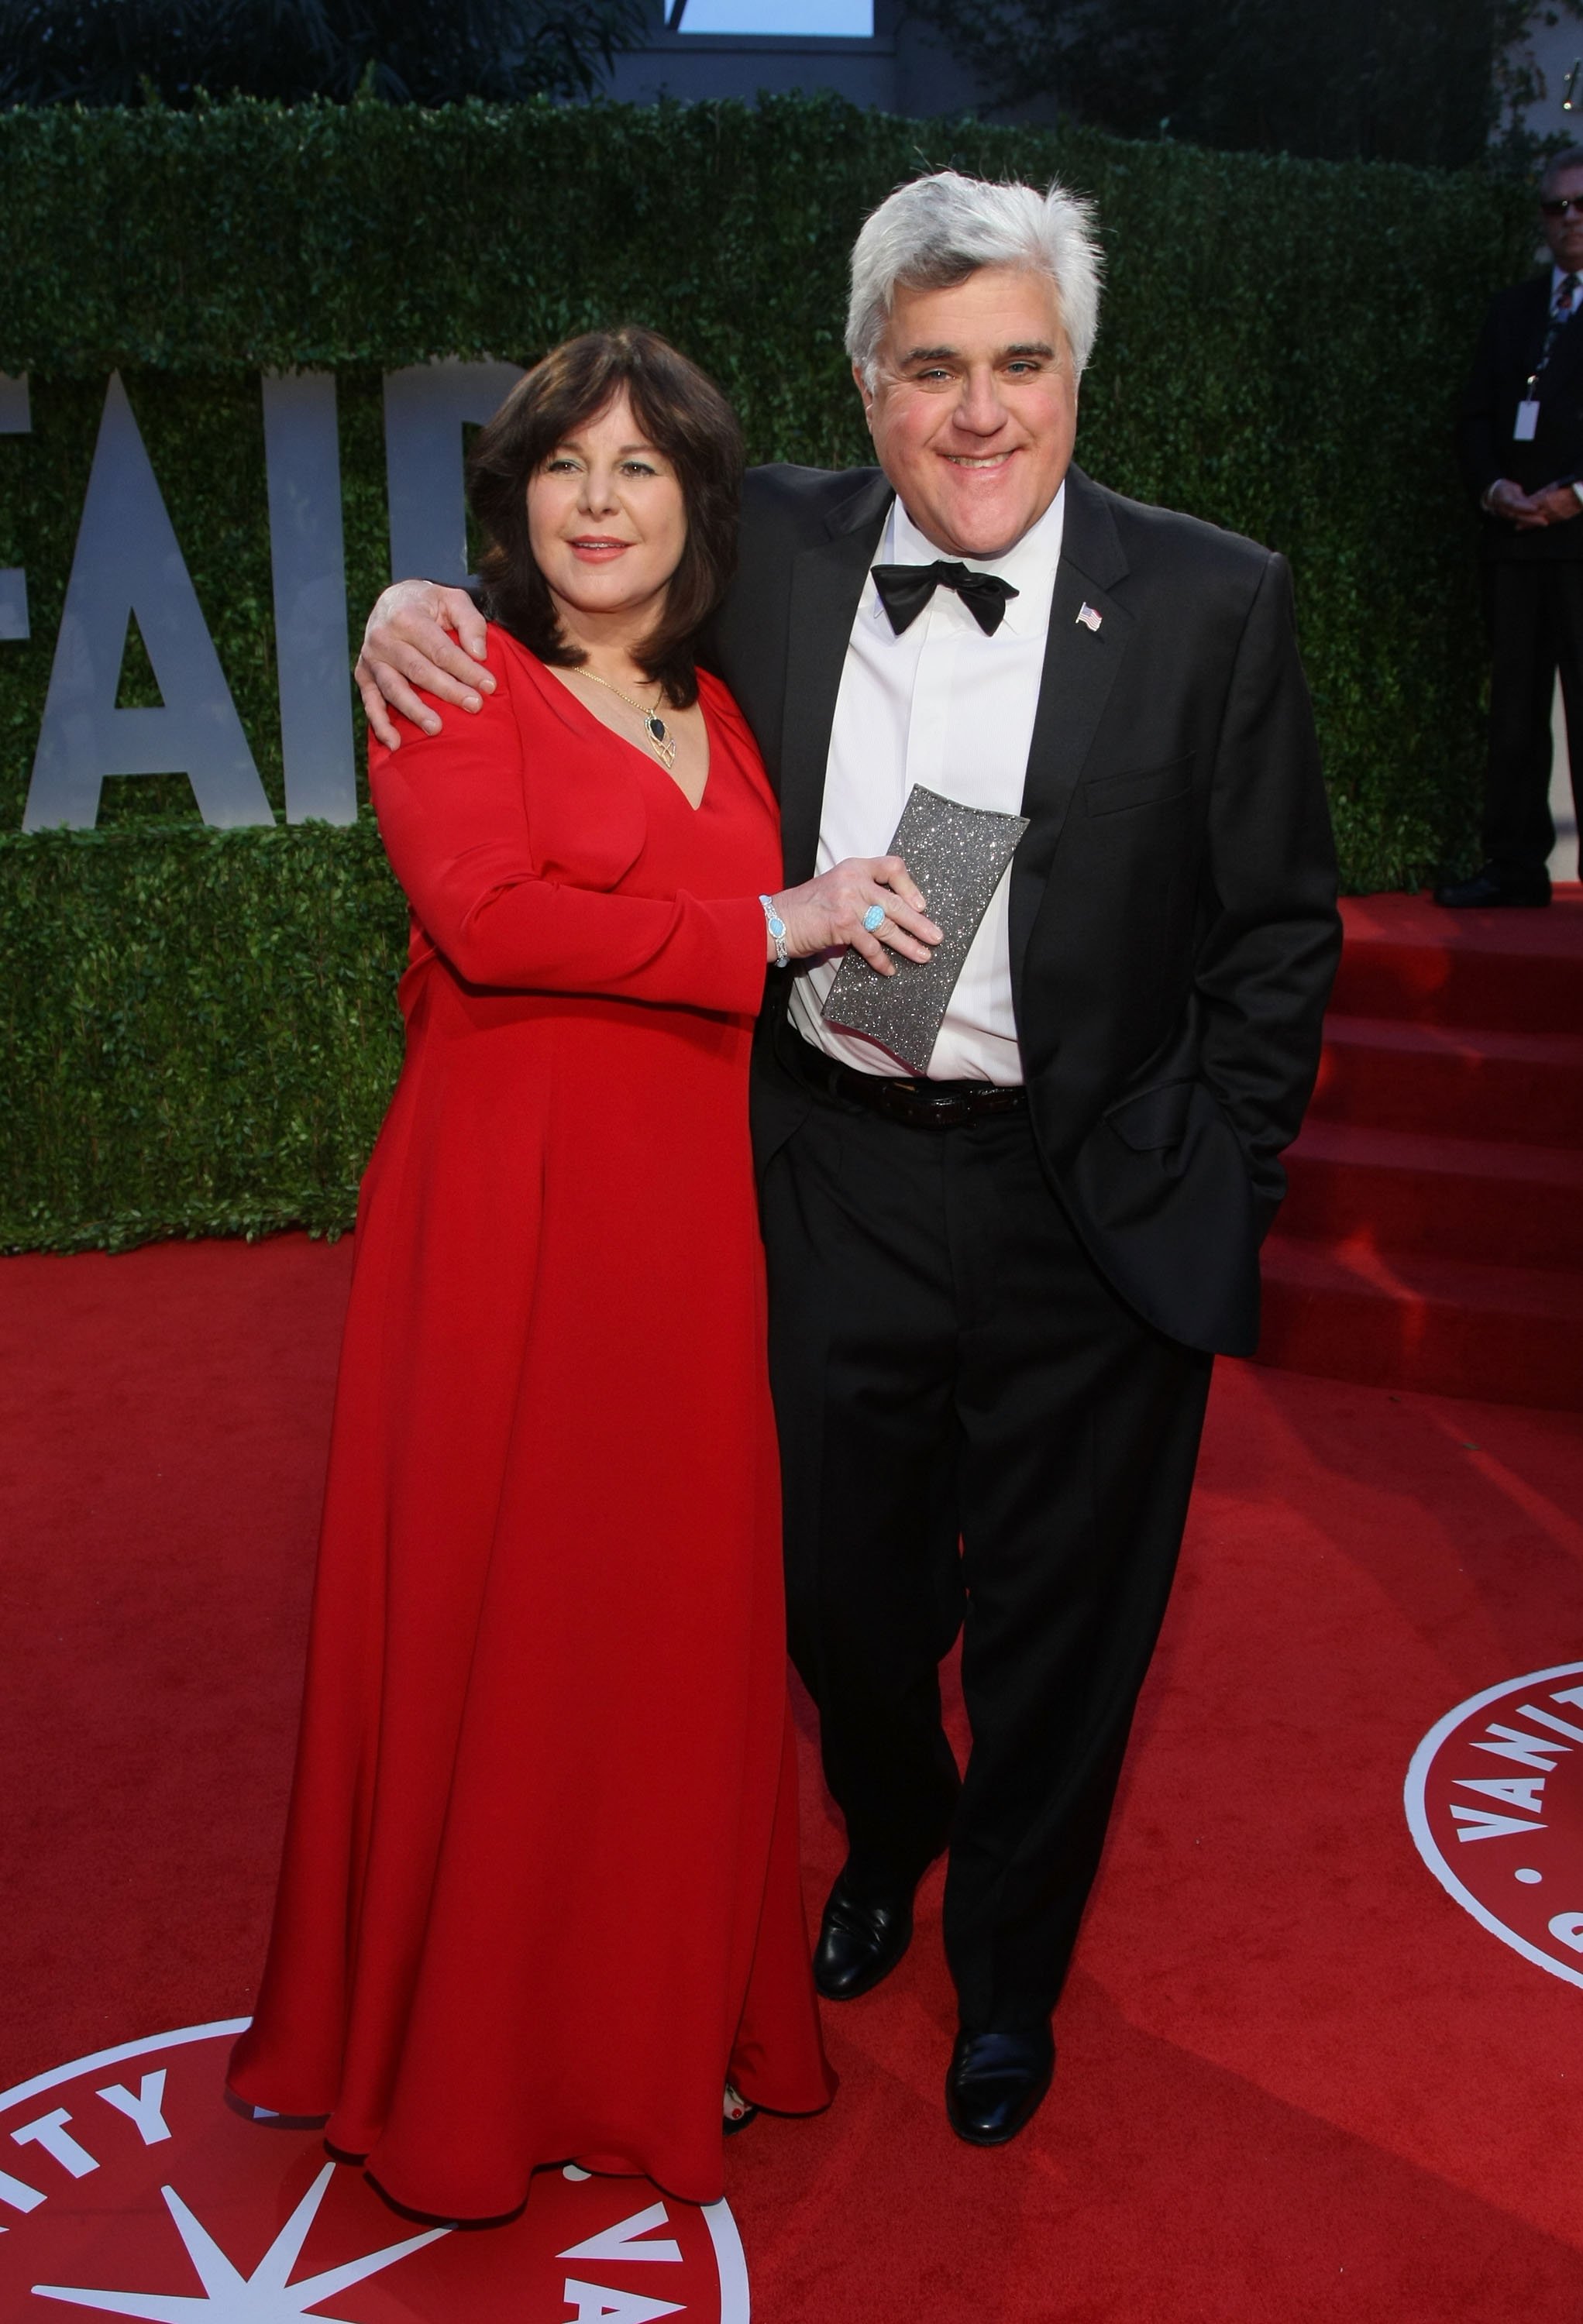 Jay Leno and Mavis Nicholson Leno at the Vanity Fair Oscar Party hosted by Graydon Carter on February 22, 2009, in West Hollywood, California | Source: Getty Images